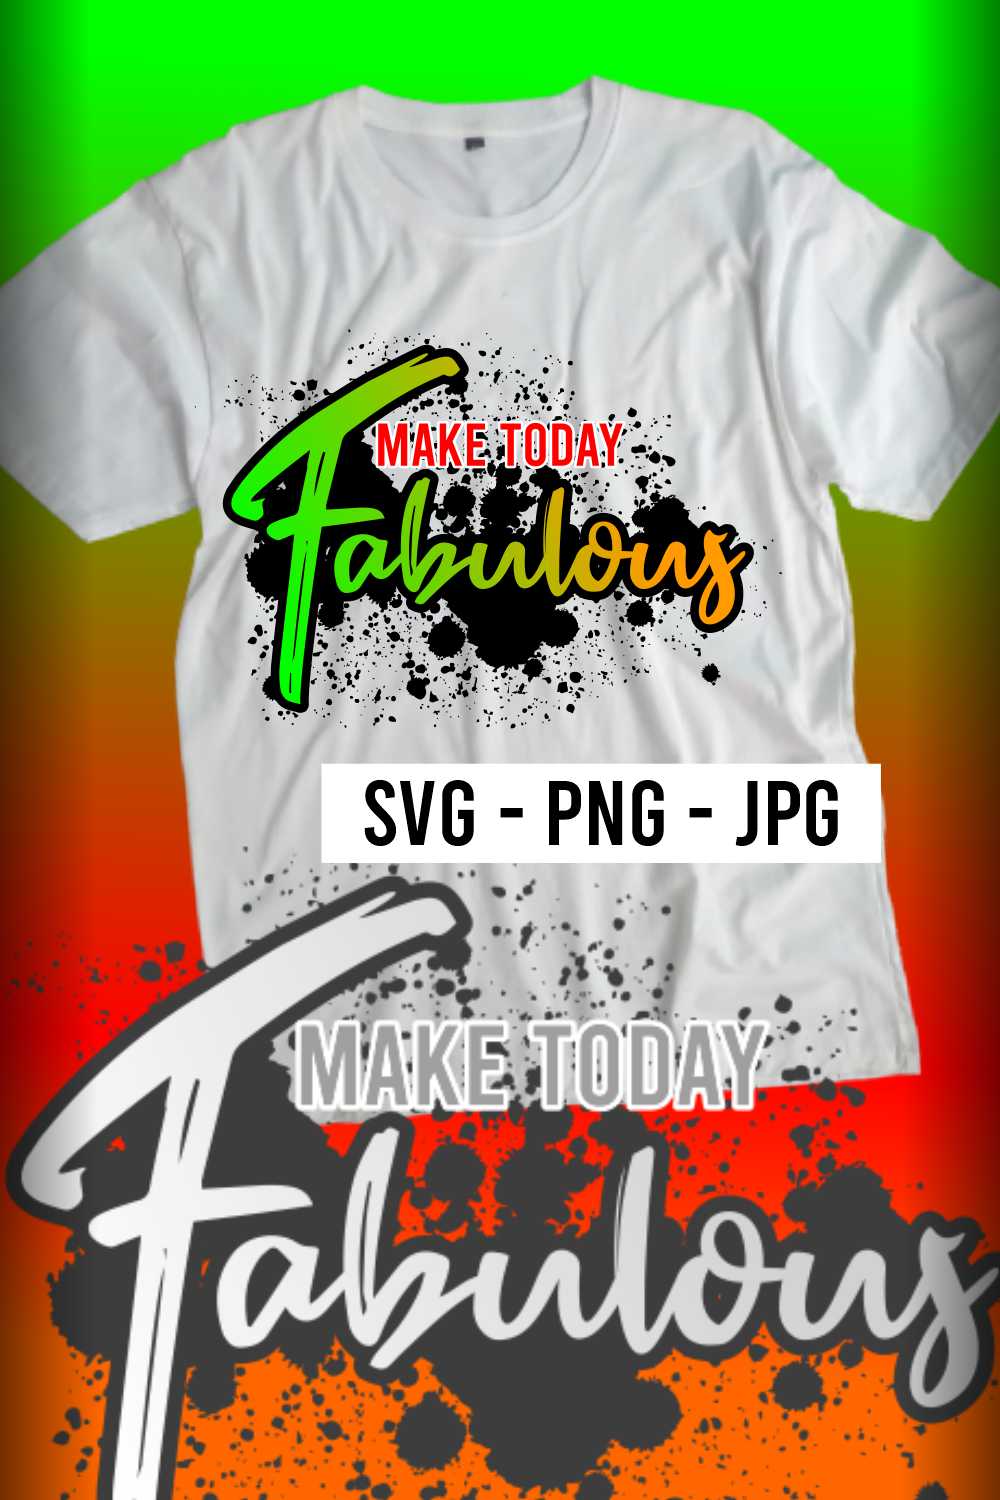 MAKE TODAY FABULOUS Quotes Sublimation T-shirt Designs previews image.